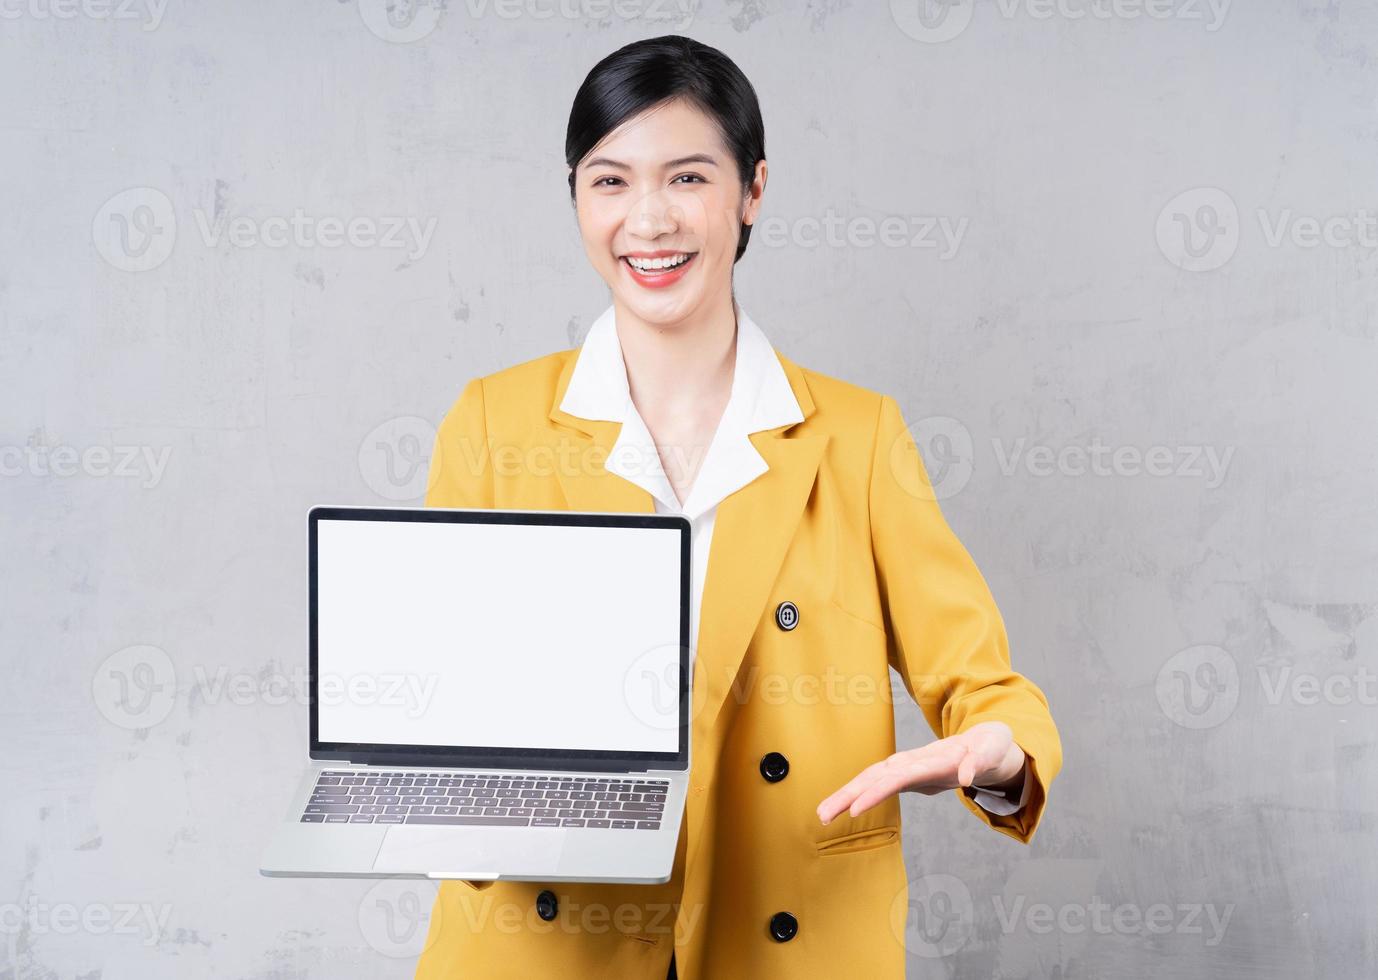 Photo of young Asian woman holding laptop